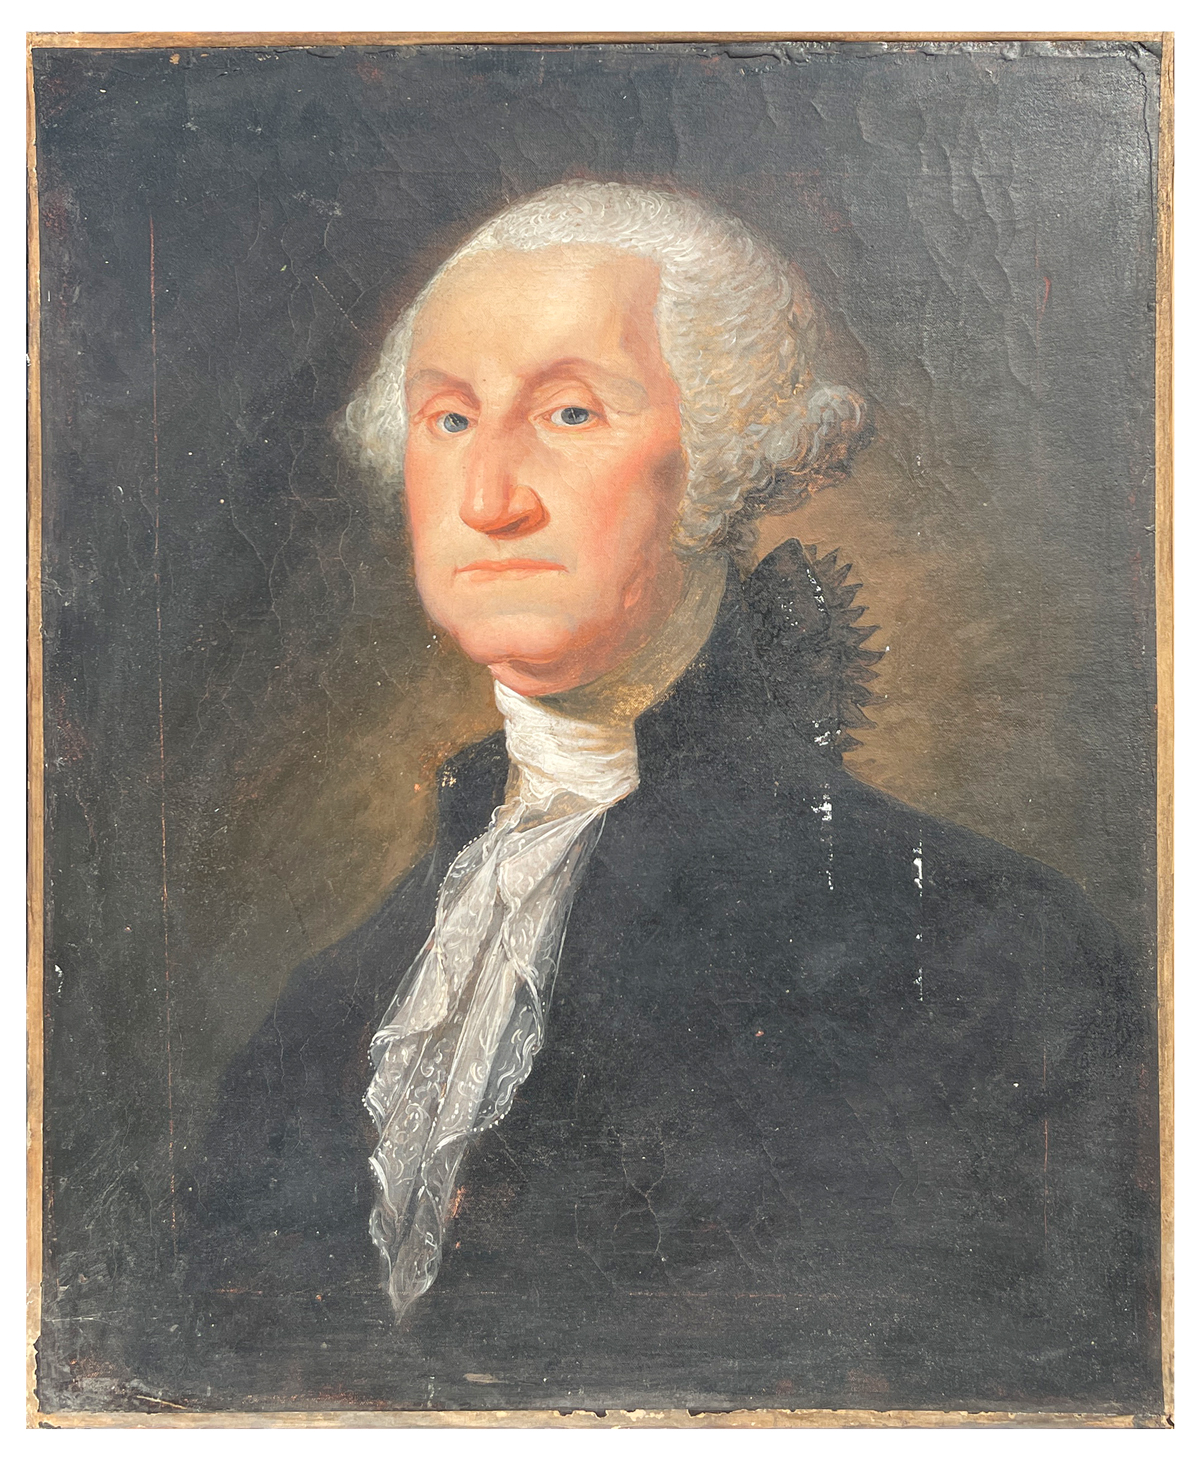 PAINTING OF GEORGE WASHINGTON AFTER